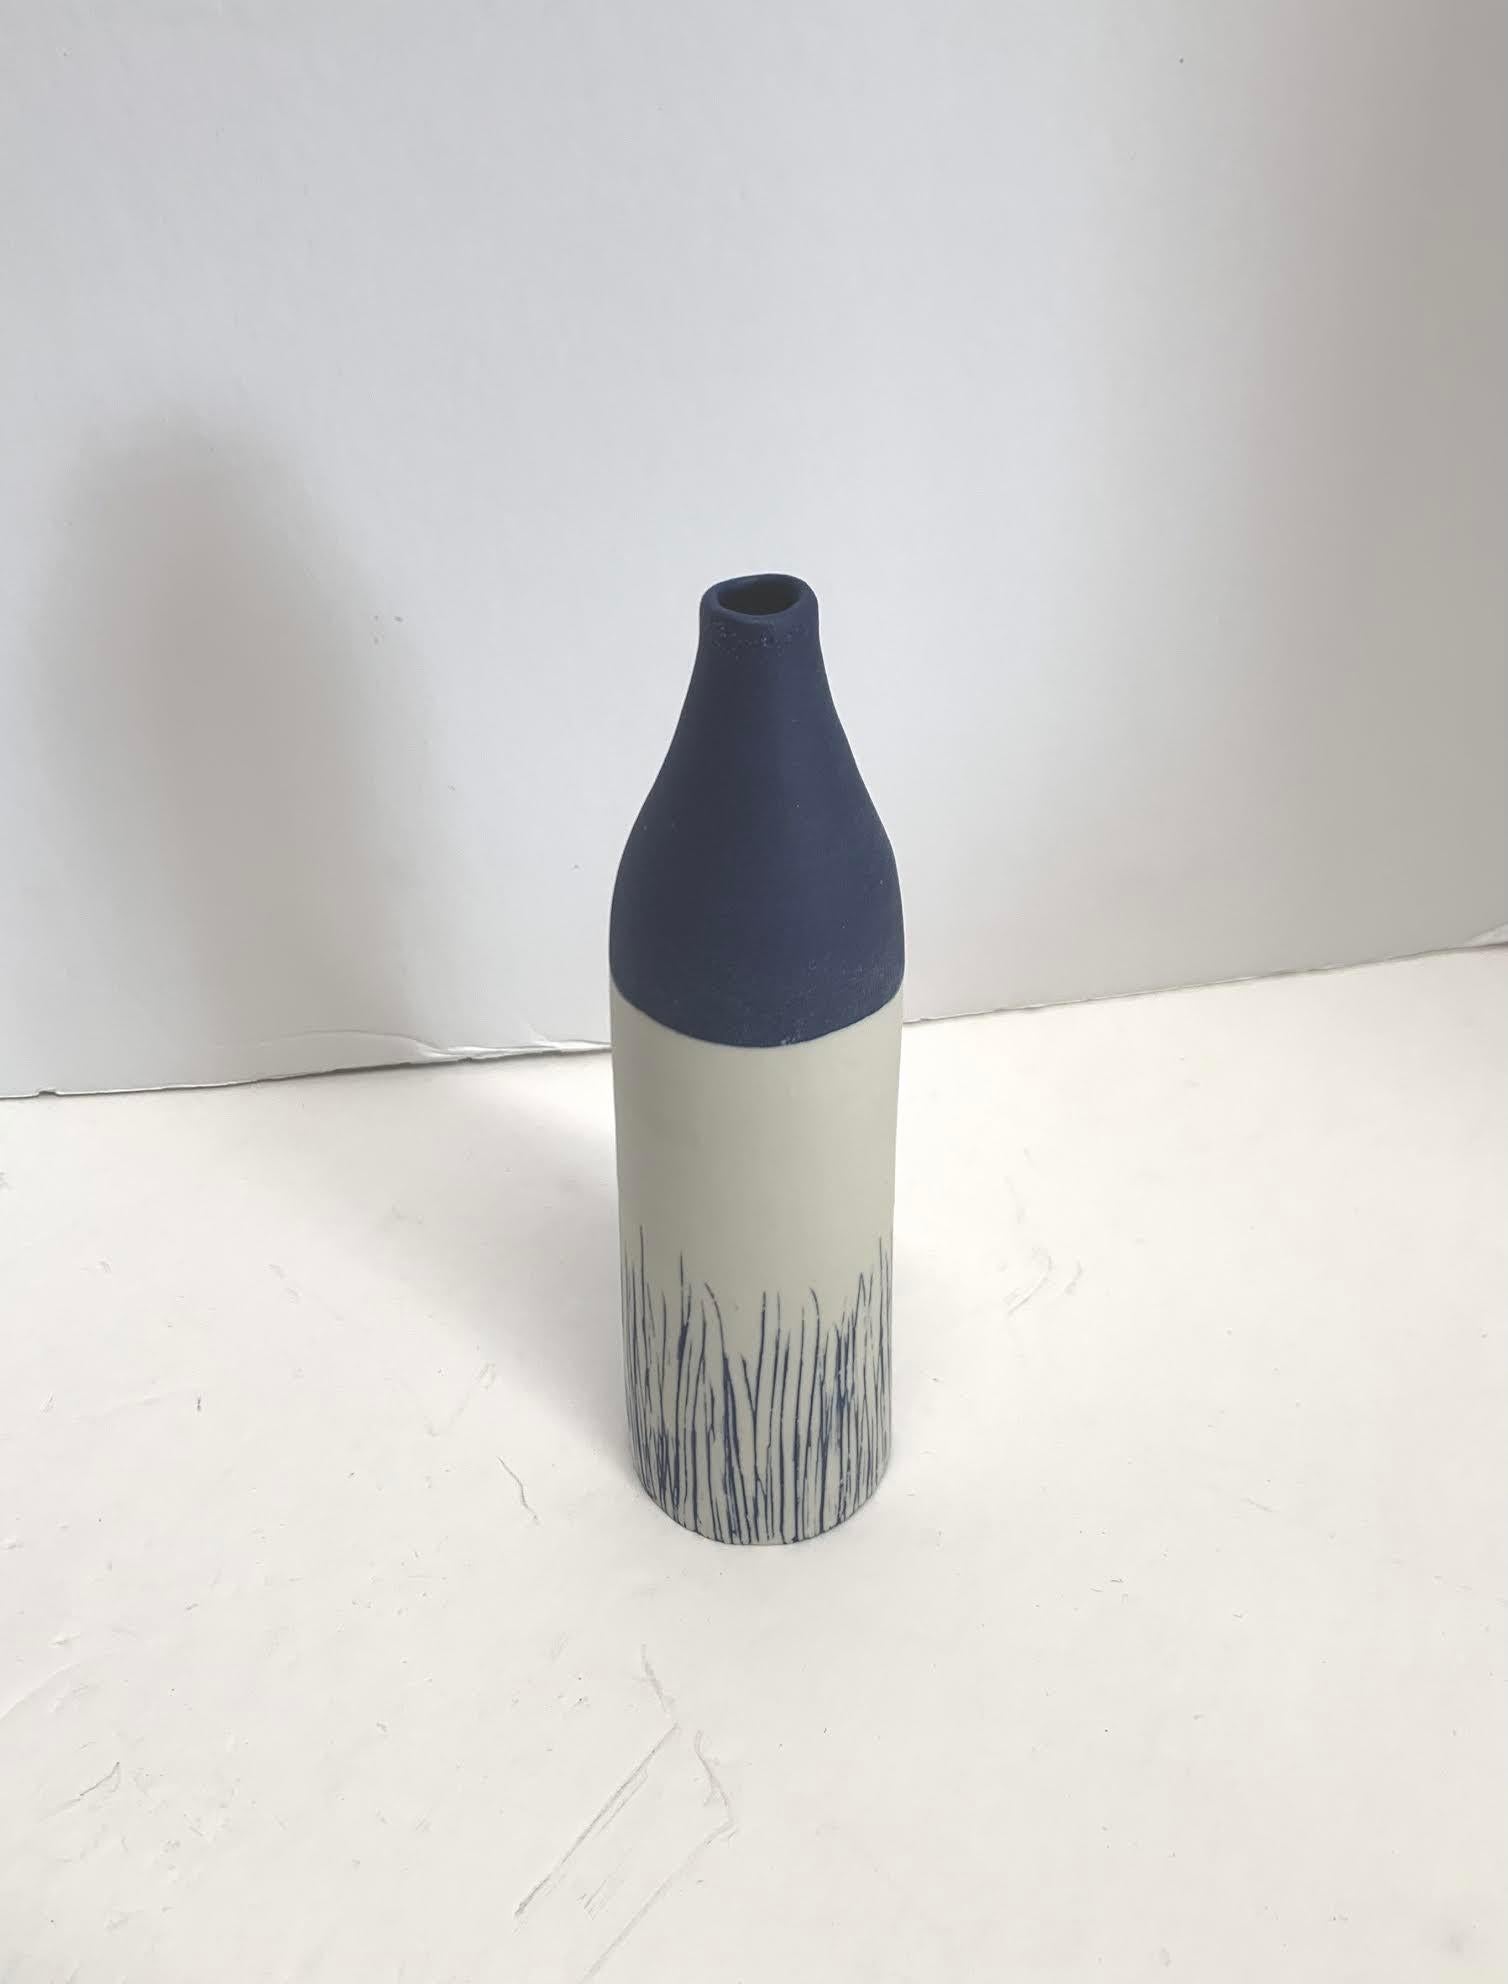 Contemporary Italian hand made ceramic white and blue color block with blue grass blades design thin vase.
Matte glaze.
Part of a large collection of blue and white diminutive vases.
See image #5.